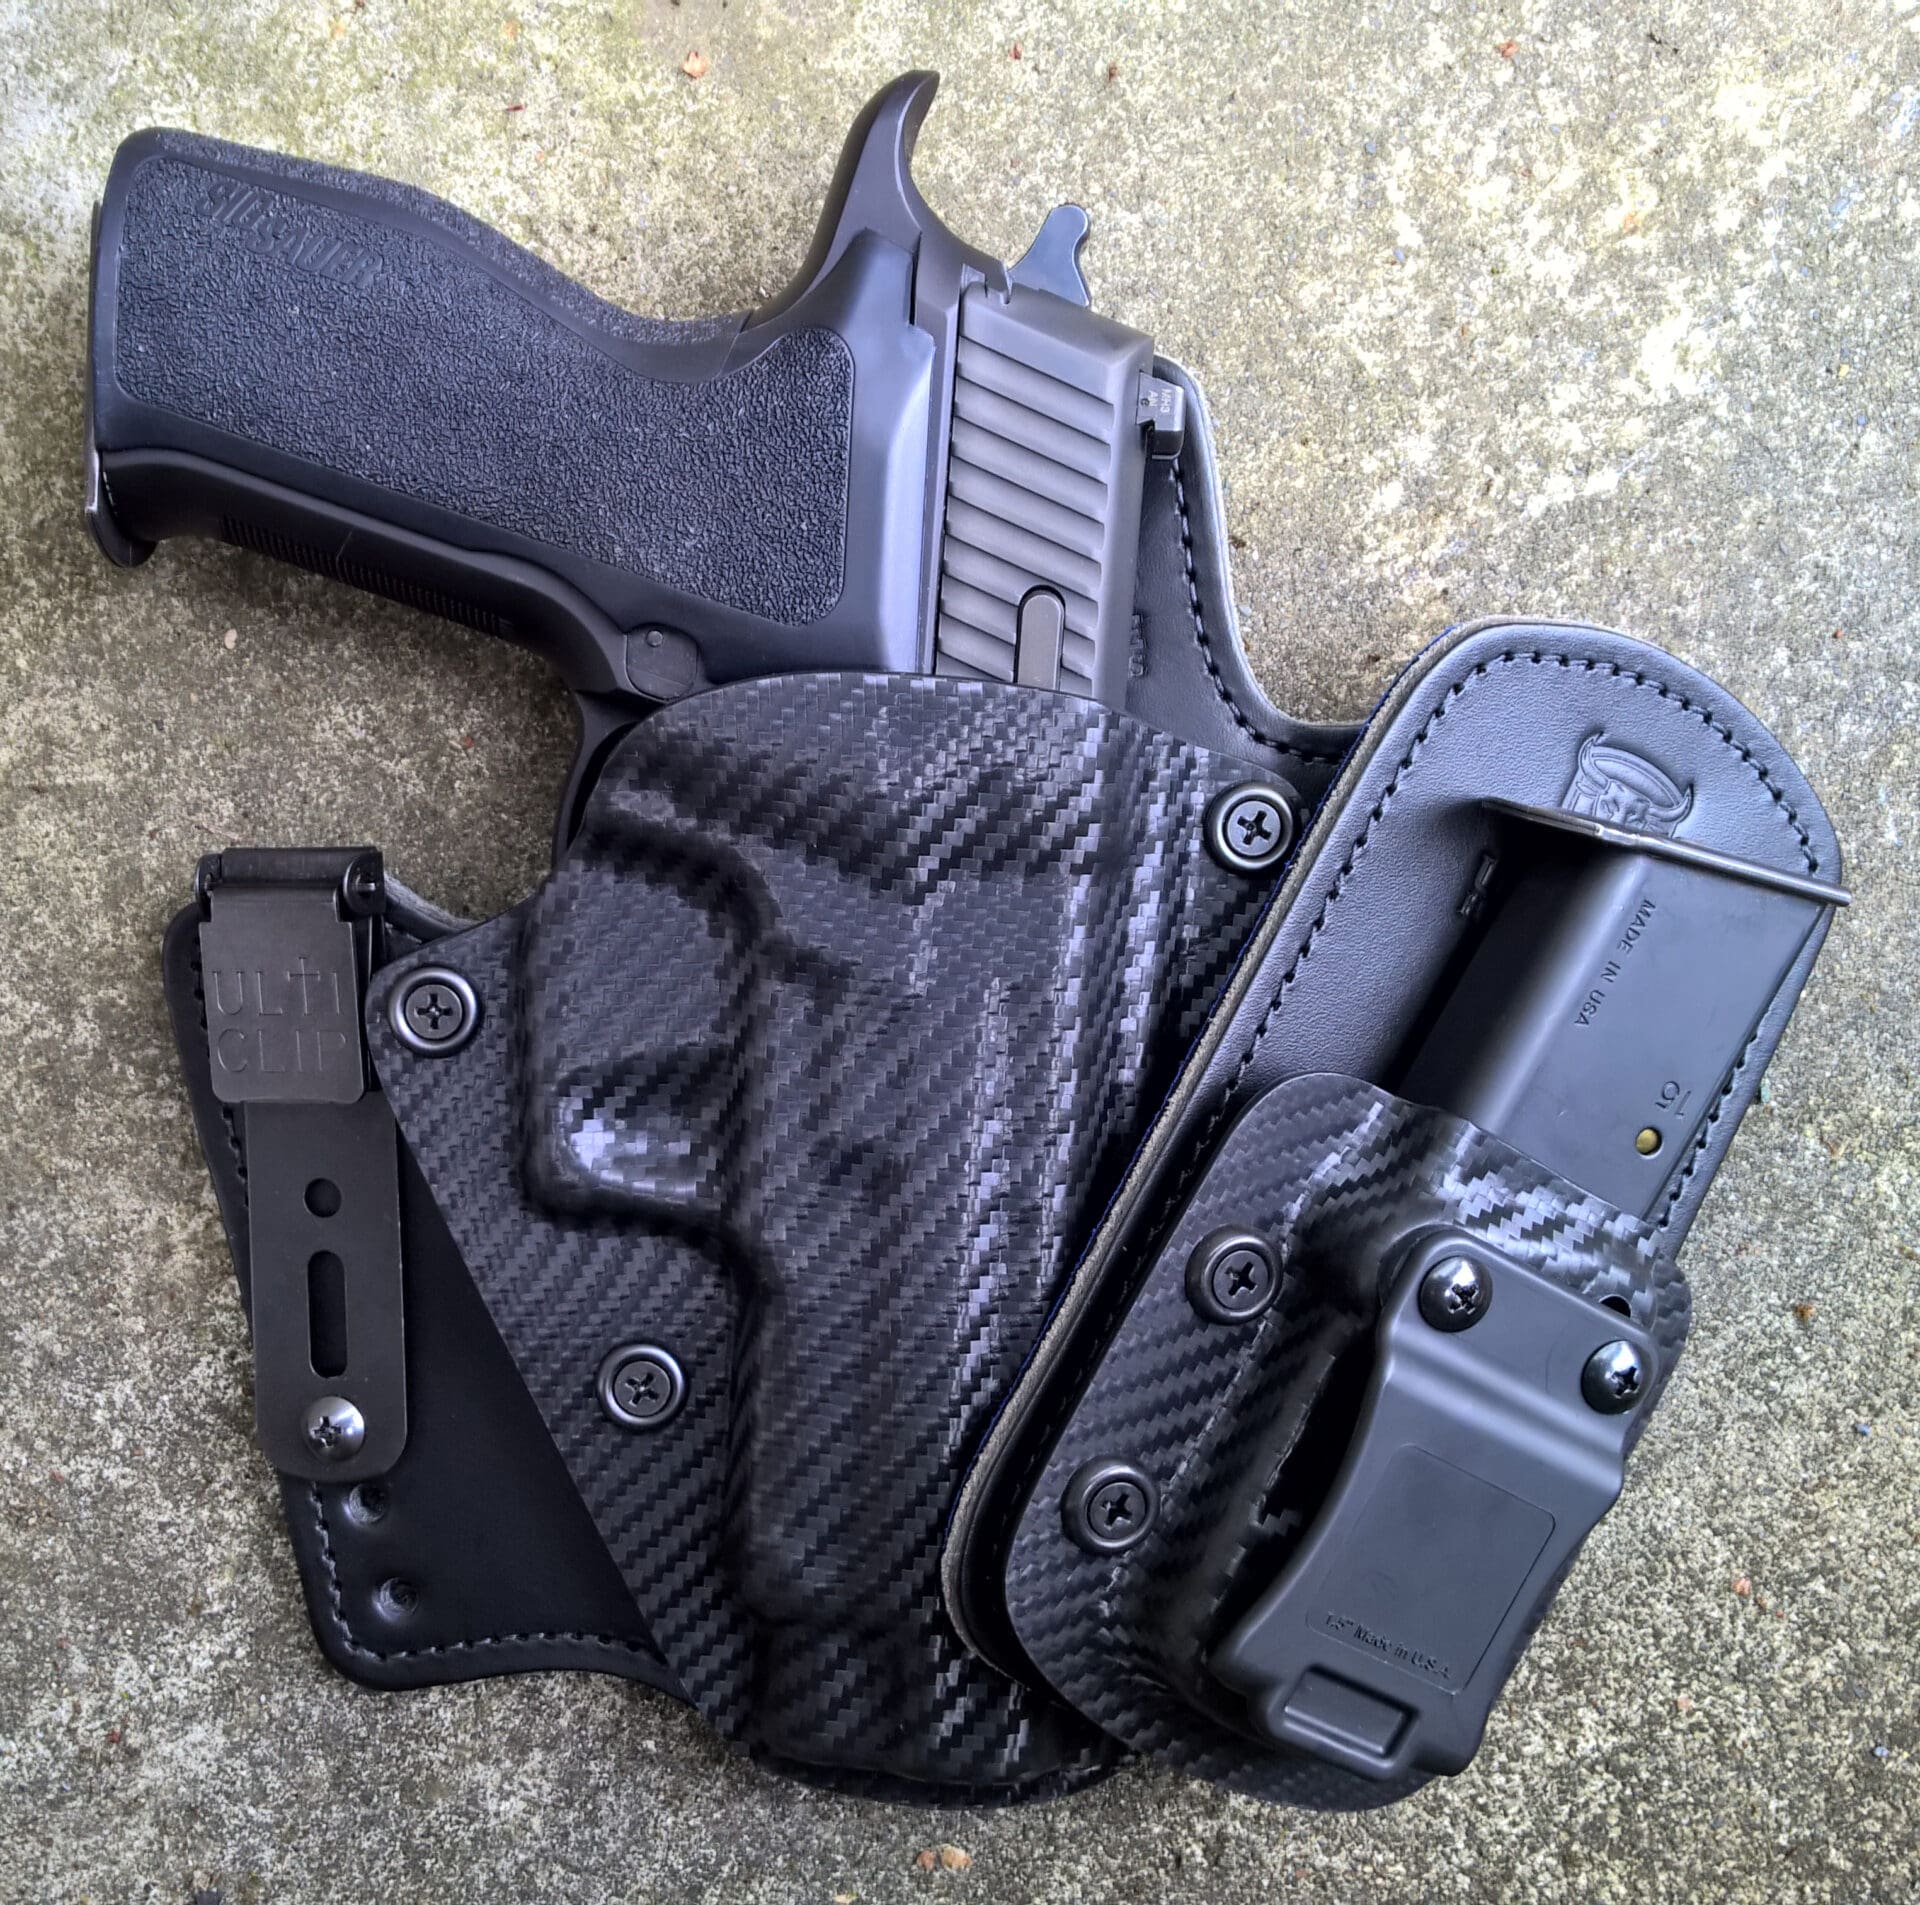 How to Make Your Own Hybrid IWB Holster : 11 Steps - Instructables